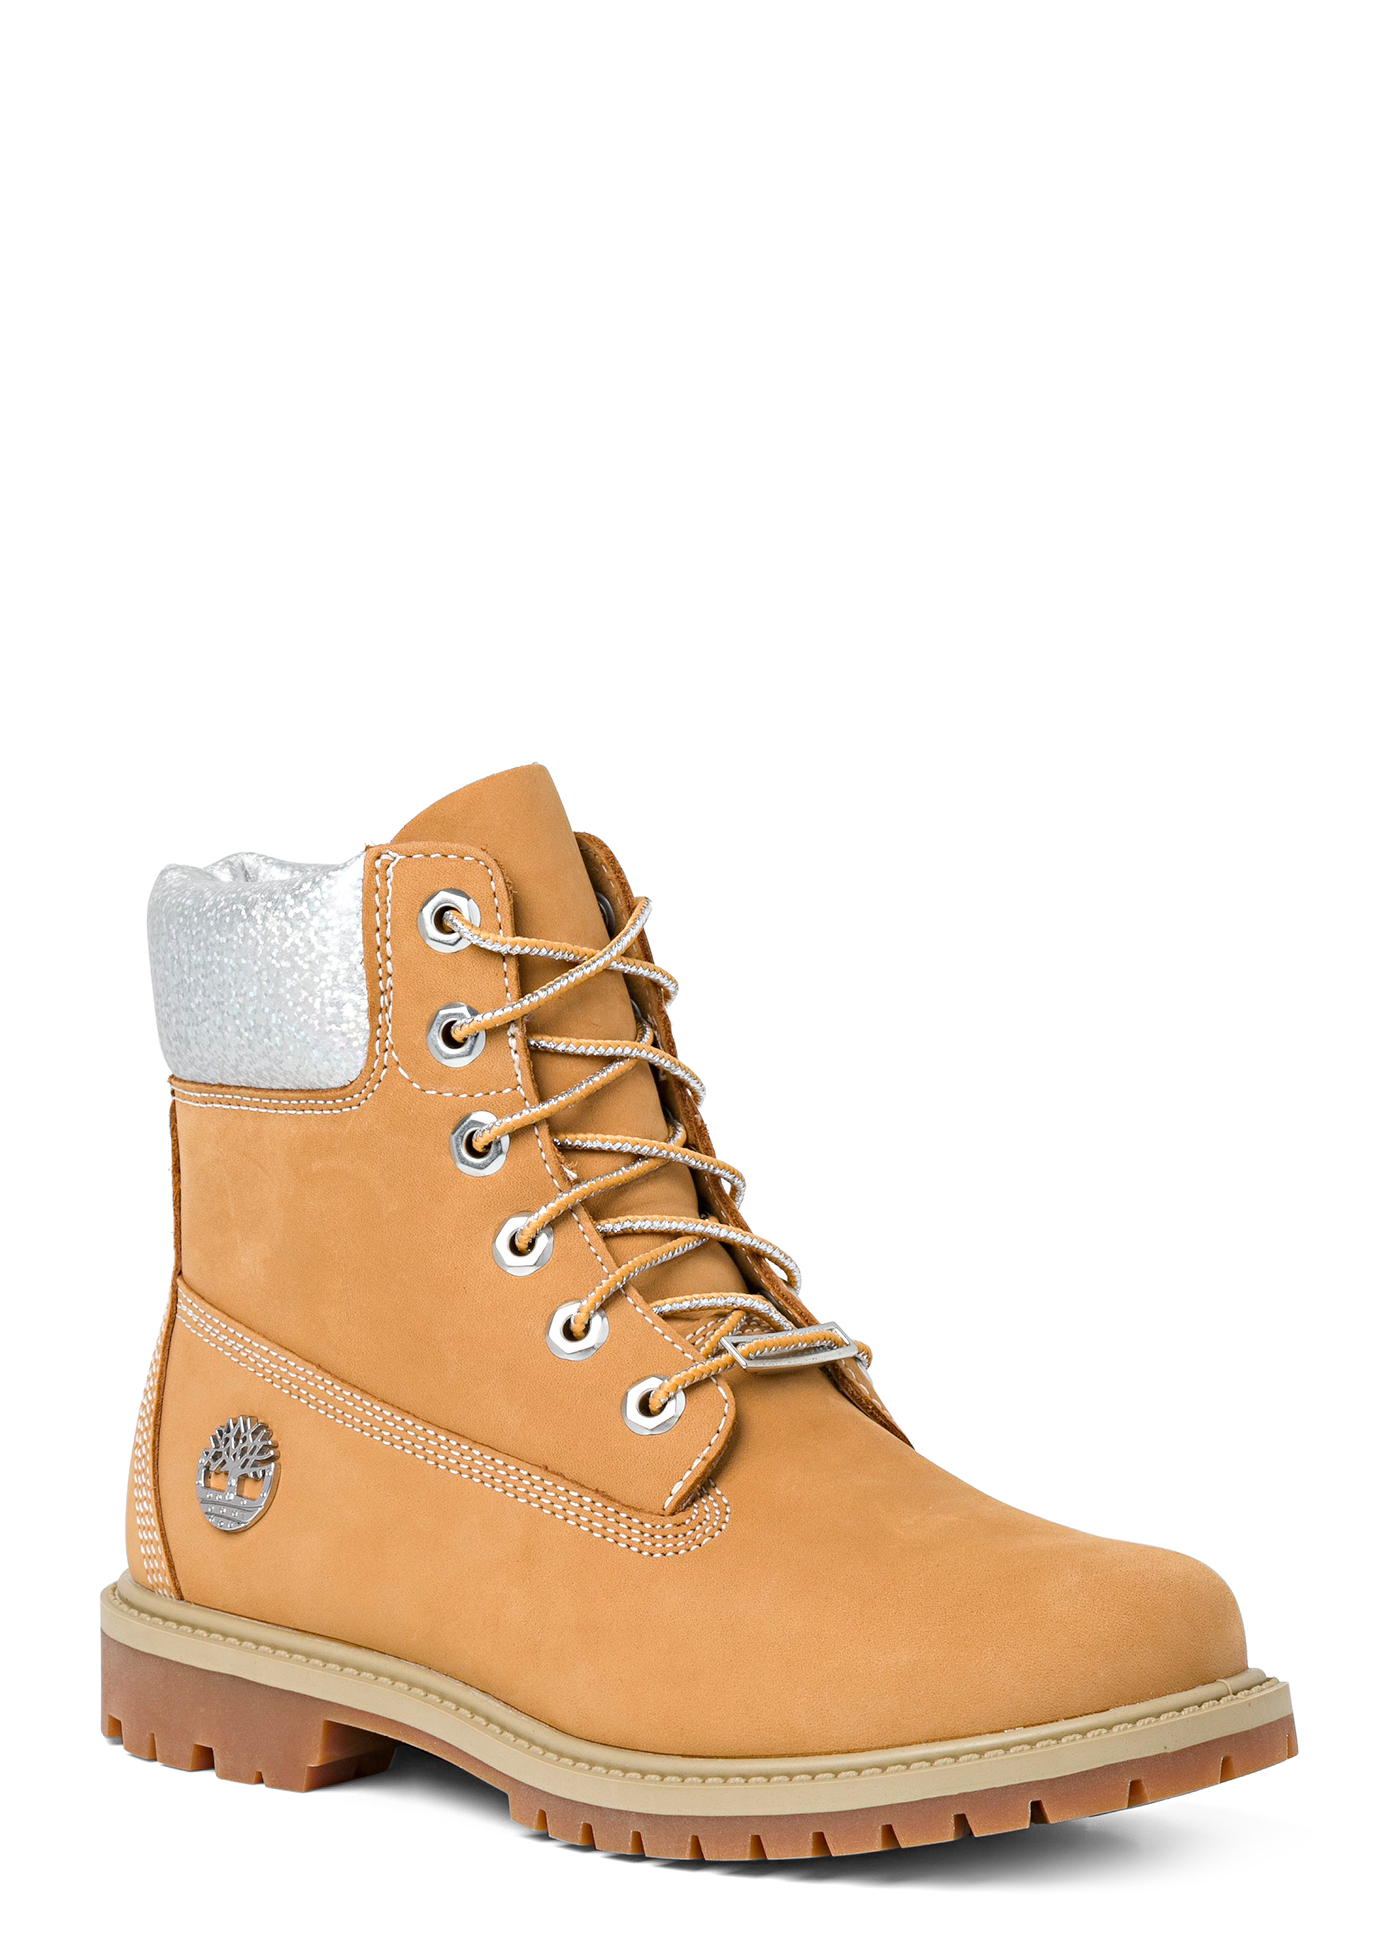 6in Heritage Boot Cupsole - WHEAT NUBUK image number 2